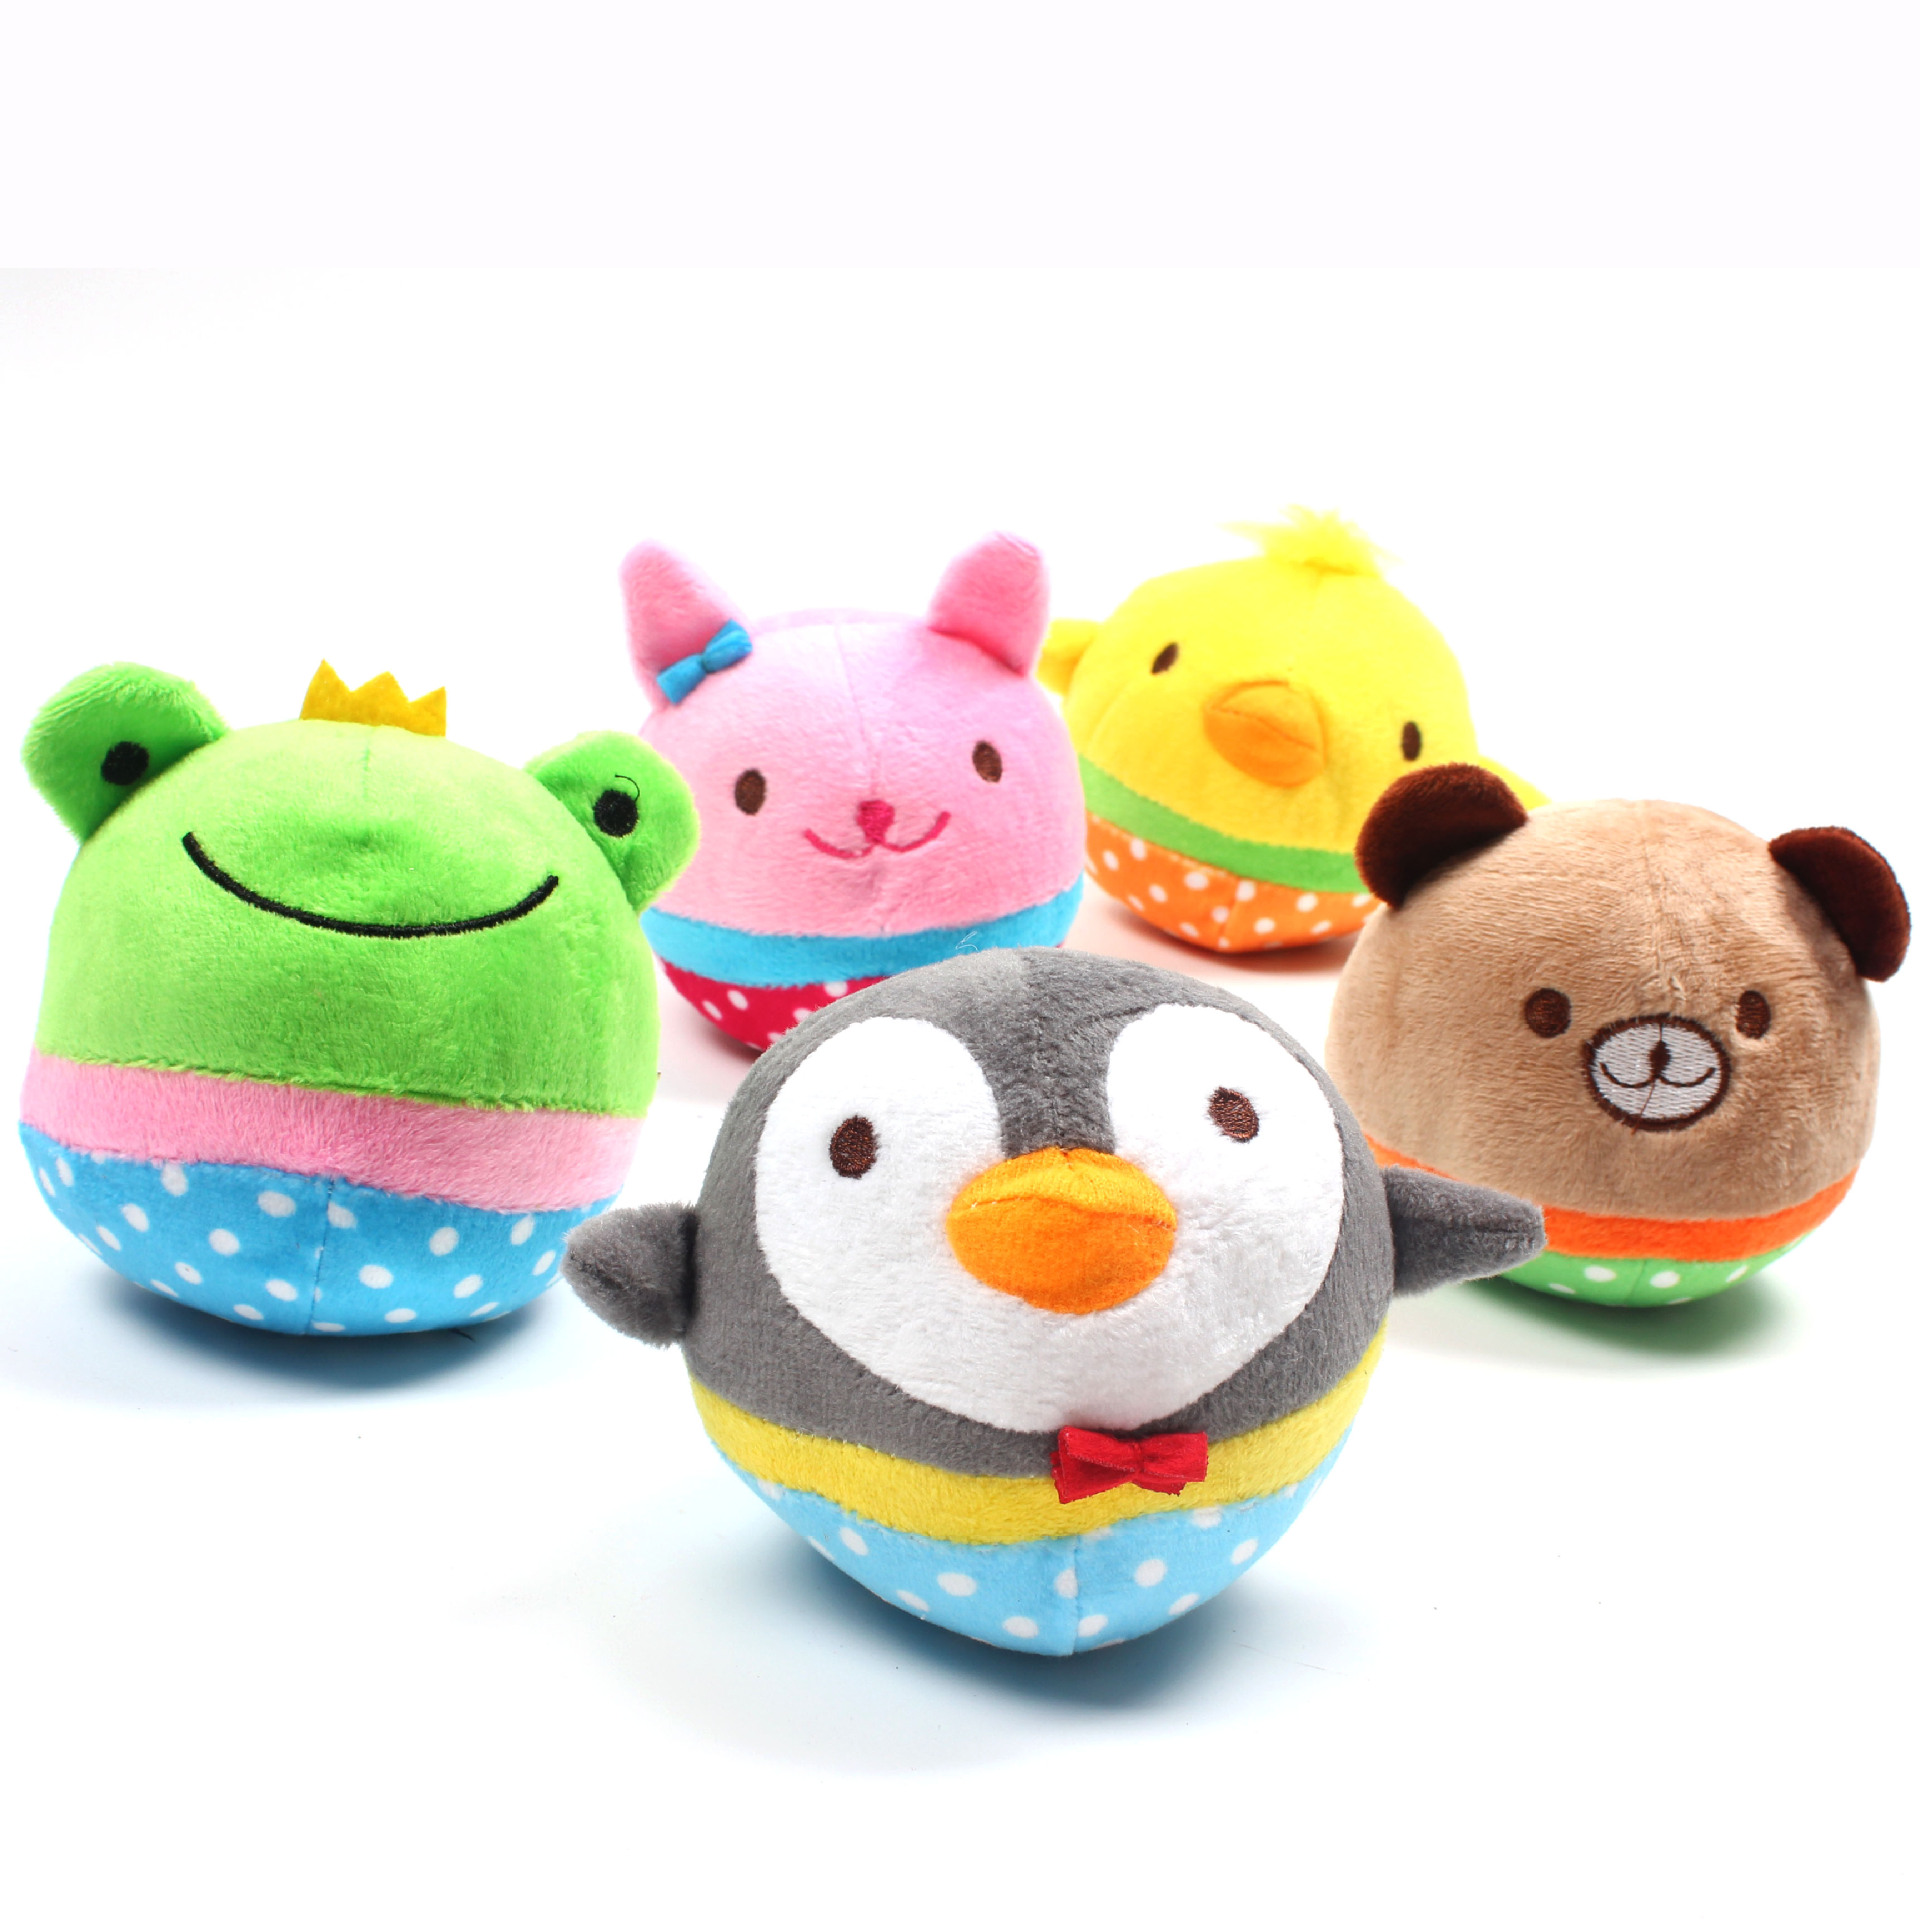 

1pc Cartoon Animals Design Pet Grinding Teeth Squeaky Plush Toy Durable Chew Toy For Dog Interactive Supply